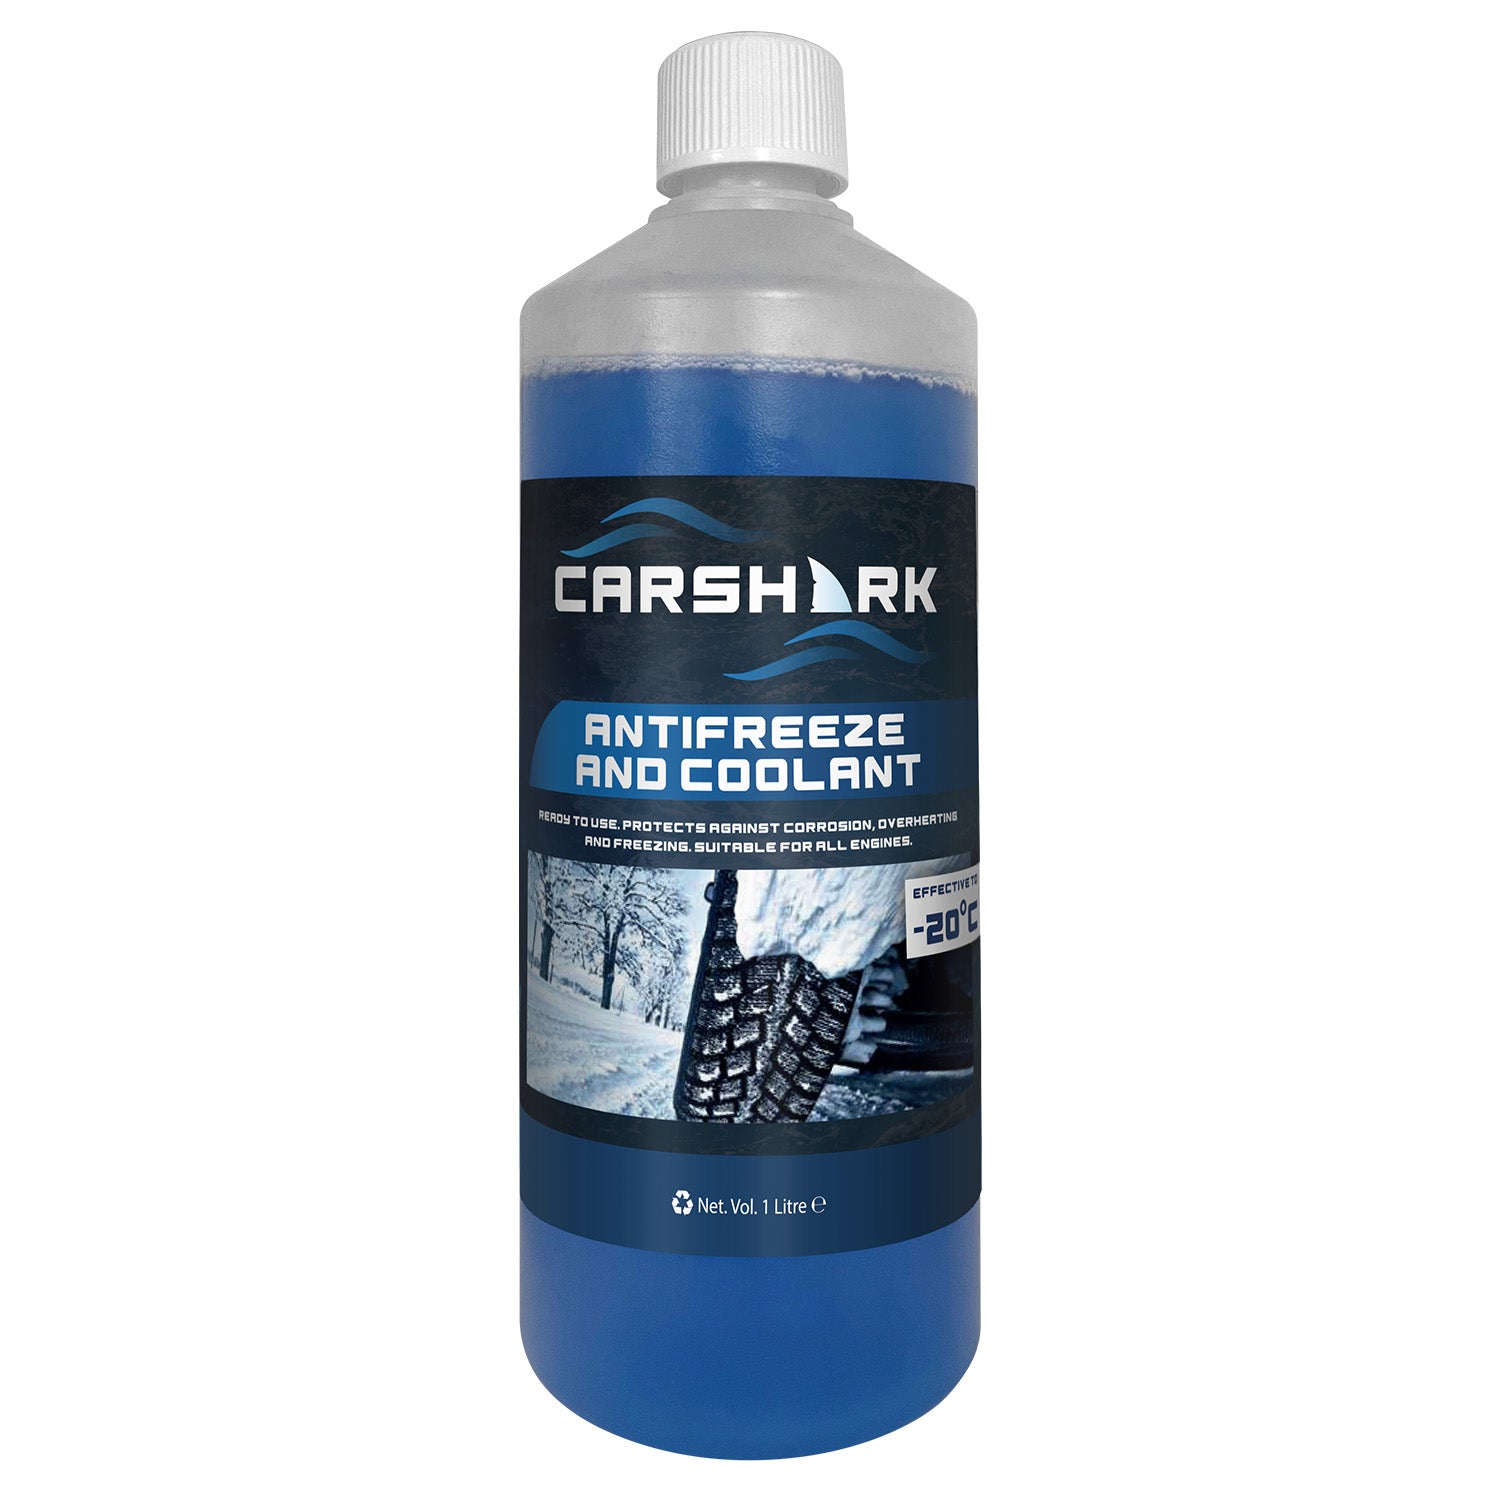 CARSHARK Antifreeze and Coolant 1 Litre -20°C Ready to use